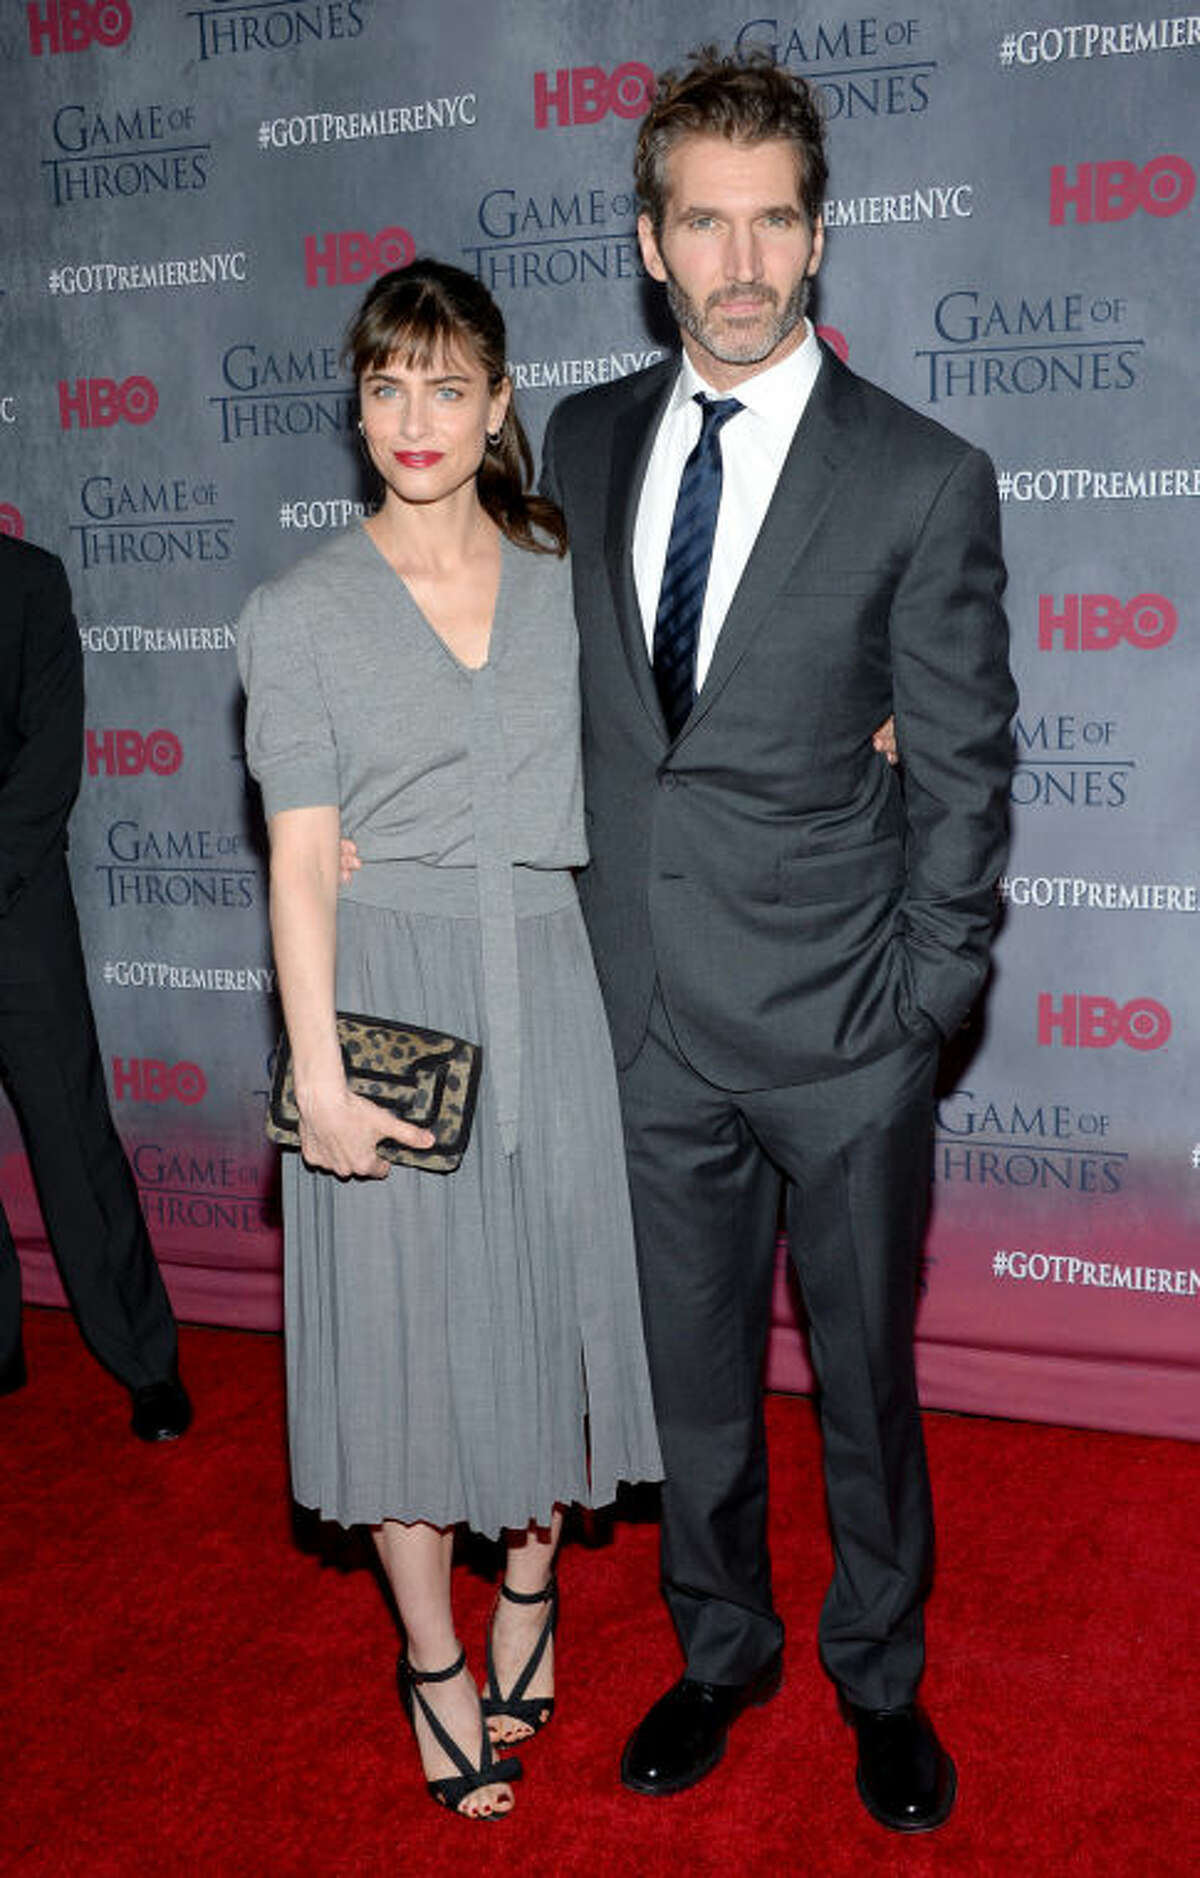 Actress Amanda Peet with husband creator and executive producer David Benioff attend HBO's "Game of Thrones" fourth season premiere at Avery Fisher Hall on Tuesday, March 18, 2014 in New York. (Photo by Evan Agostini/Invision/AP)